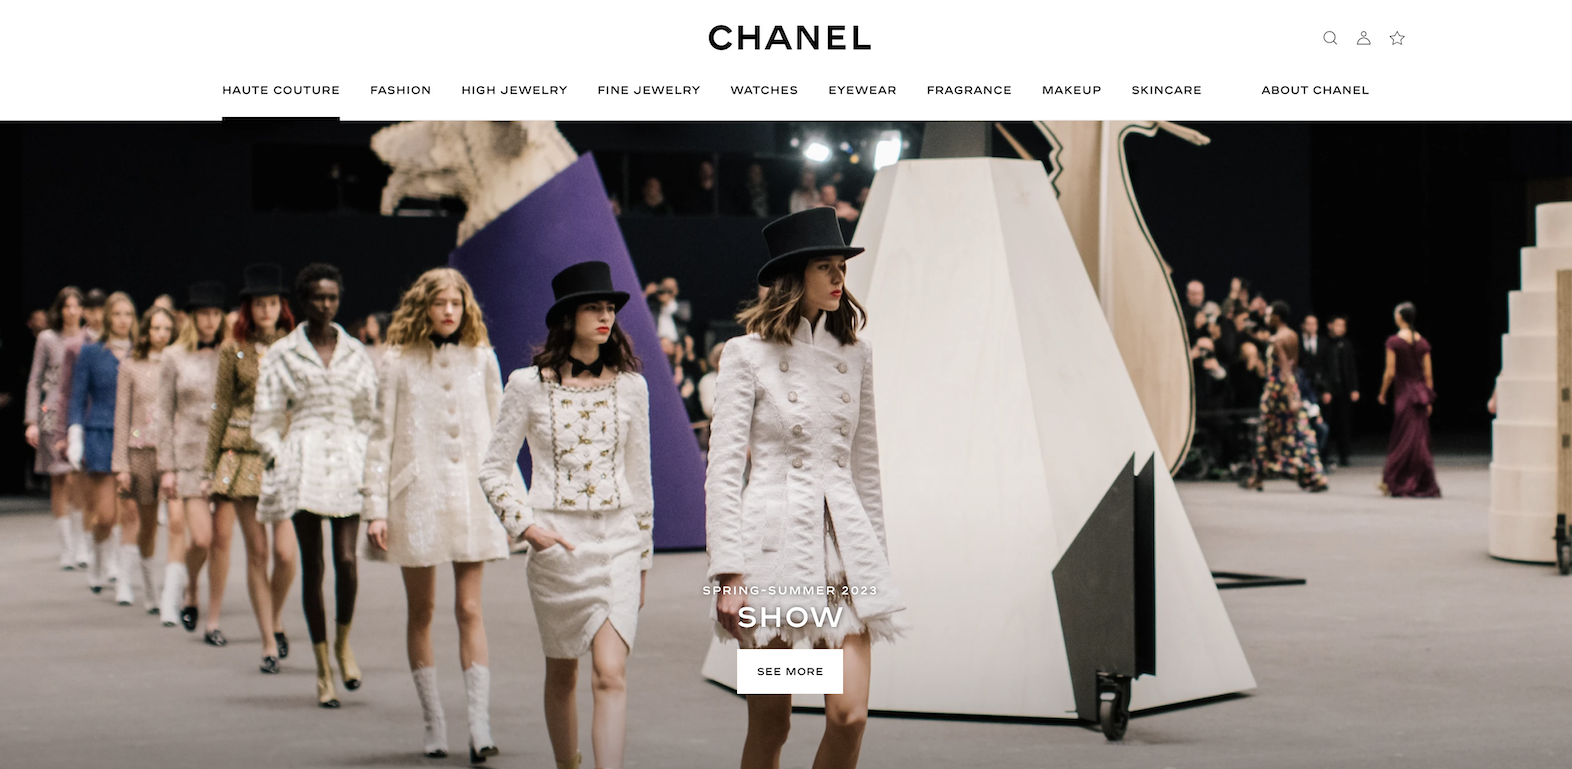 Chanel’s Capital Expenditure to Reach $1.3B: Where Will the Money Go?